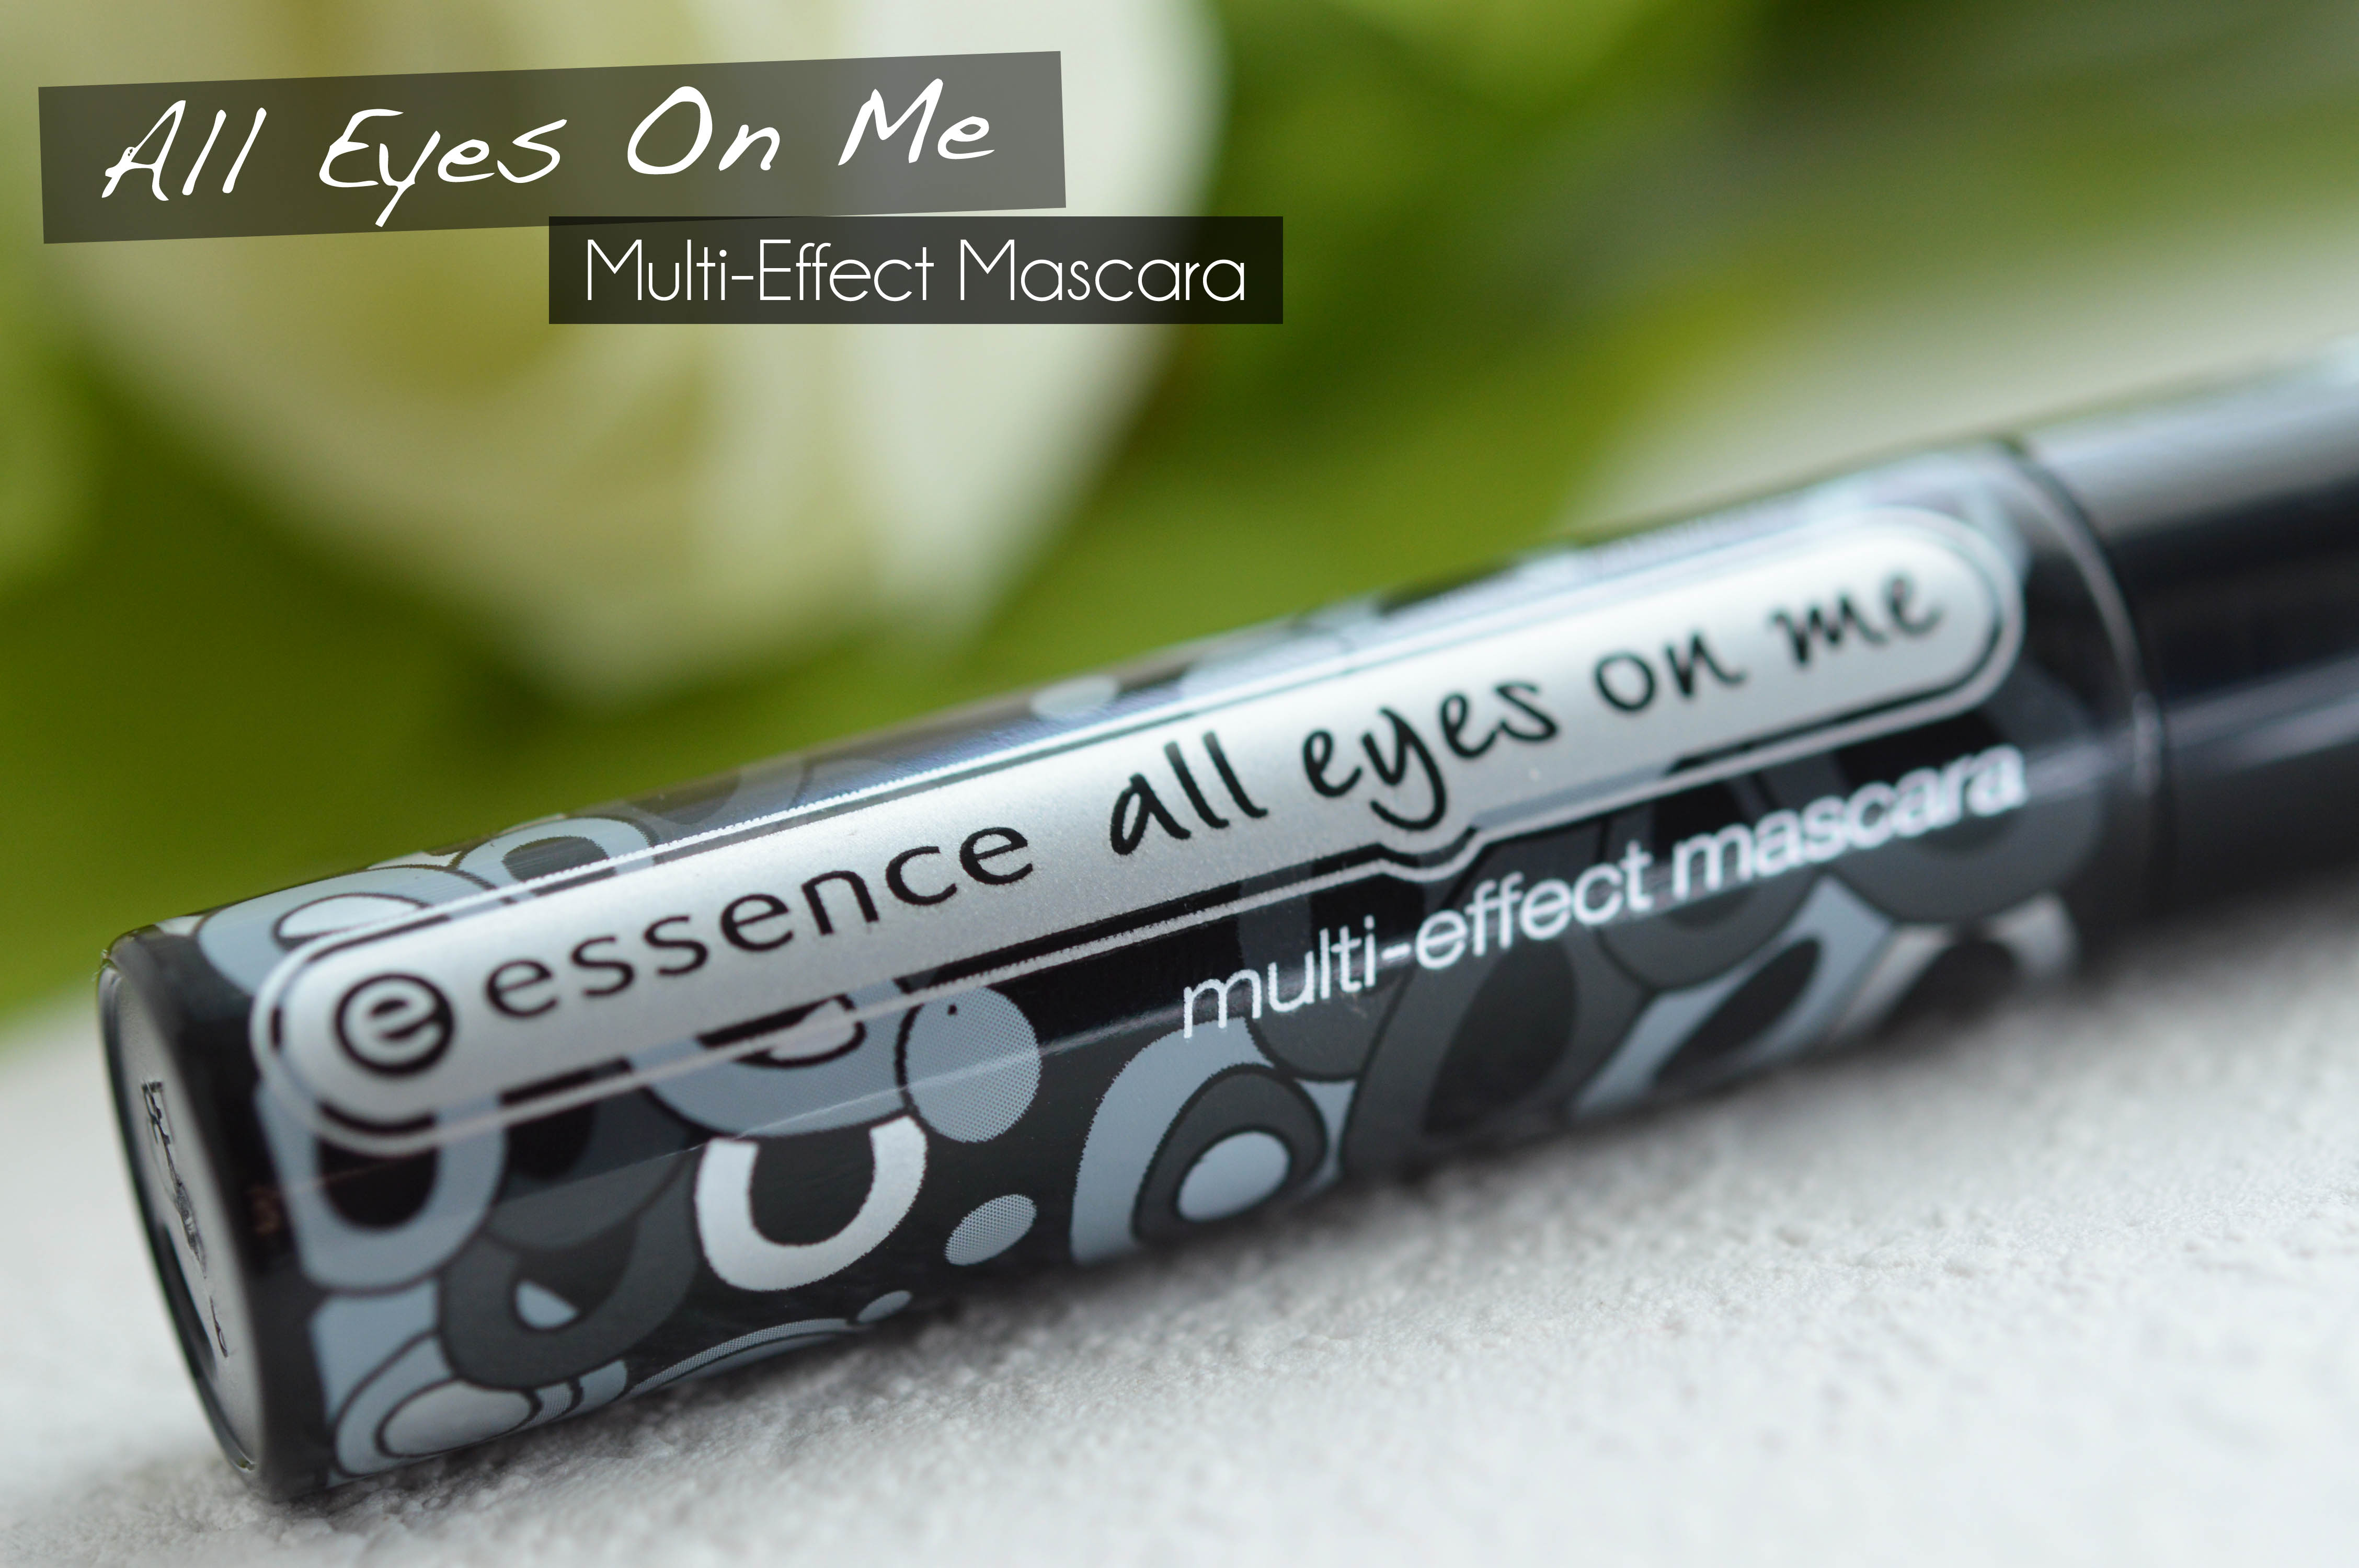 ALITTLEB_BLOG_BEAUTE_ESSENCE_LA_MARQUE_QUIL_FAUT_ENVIER_A_NOS_COPINES_FRONTALIERES_MASCARA_MULTIEFFECT_ALL_EYES_ON_ME_BLACK